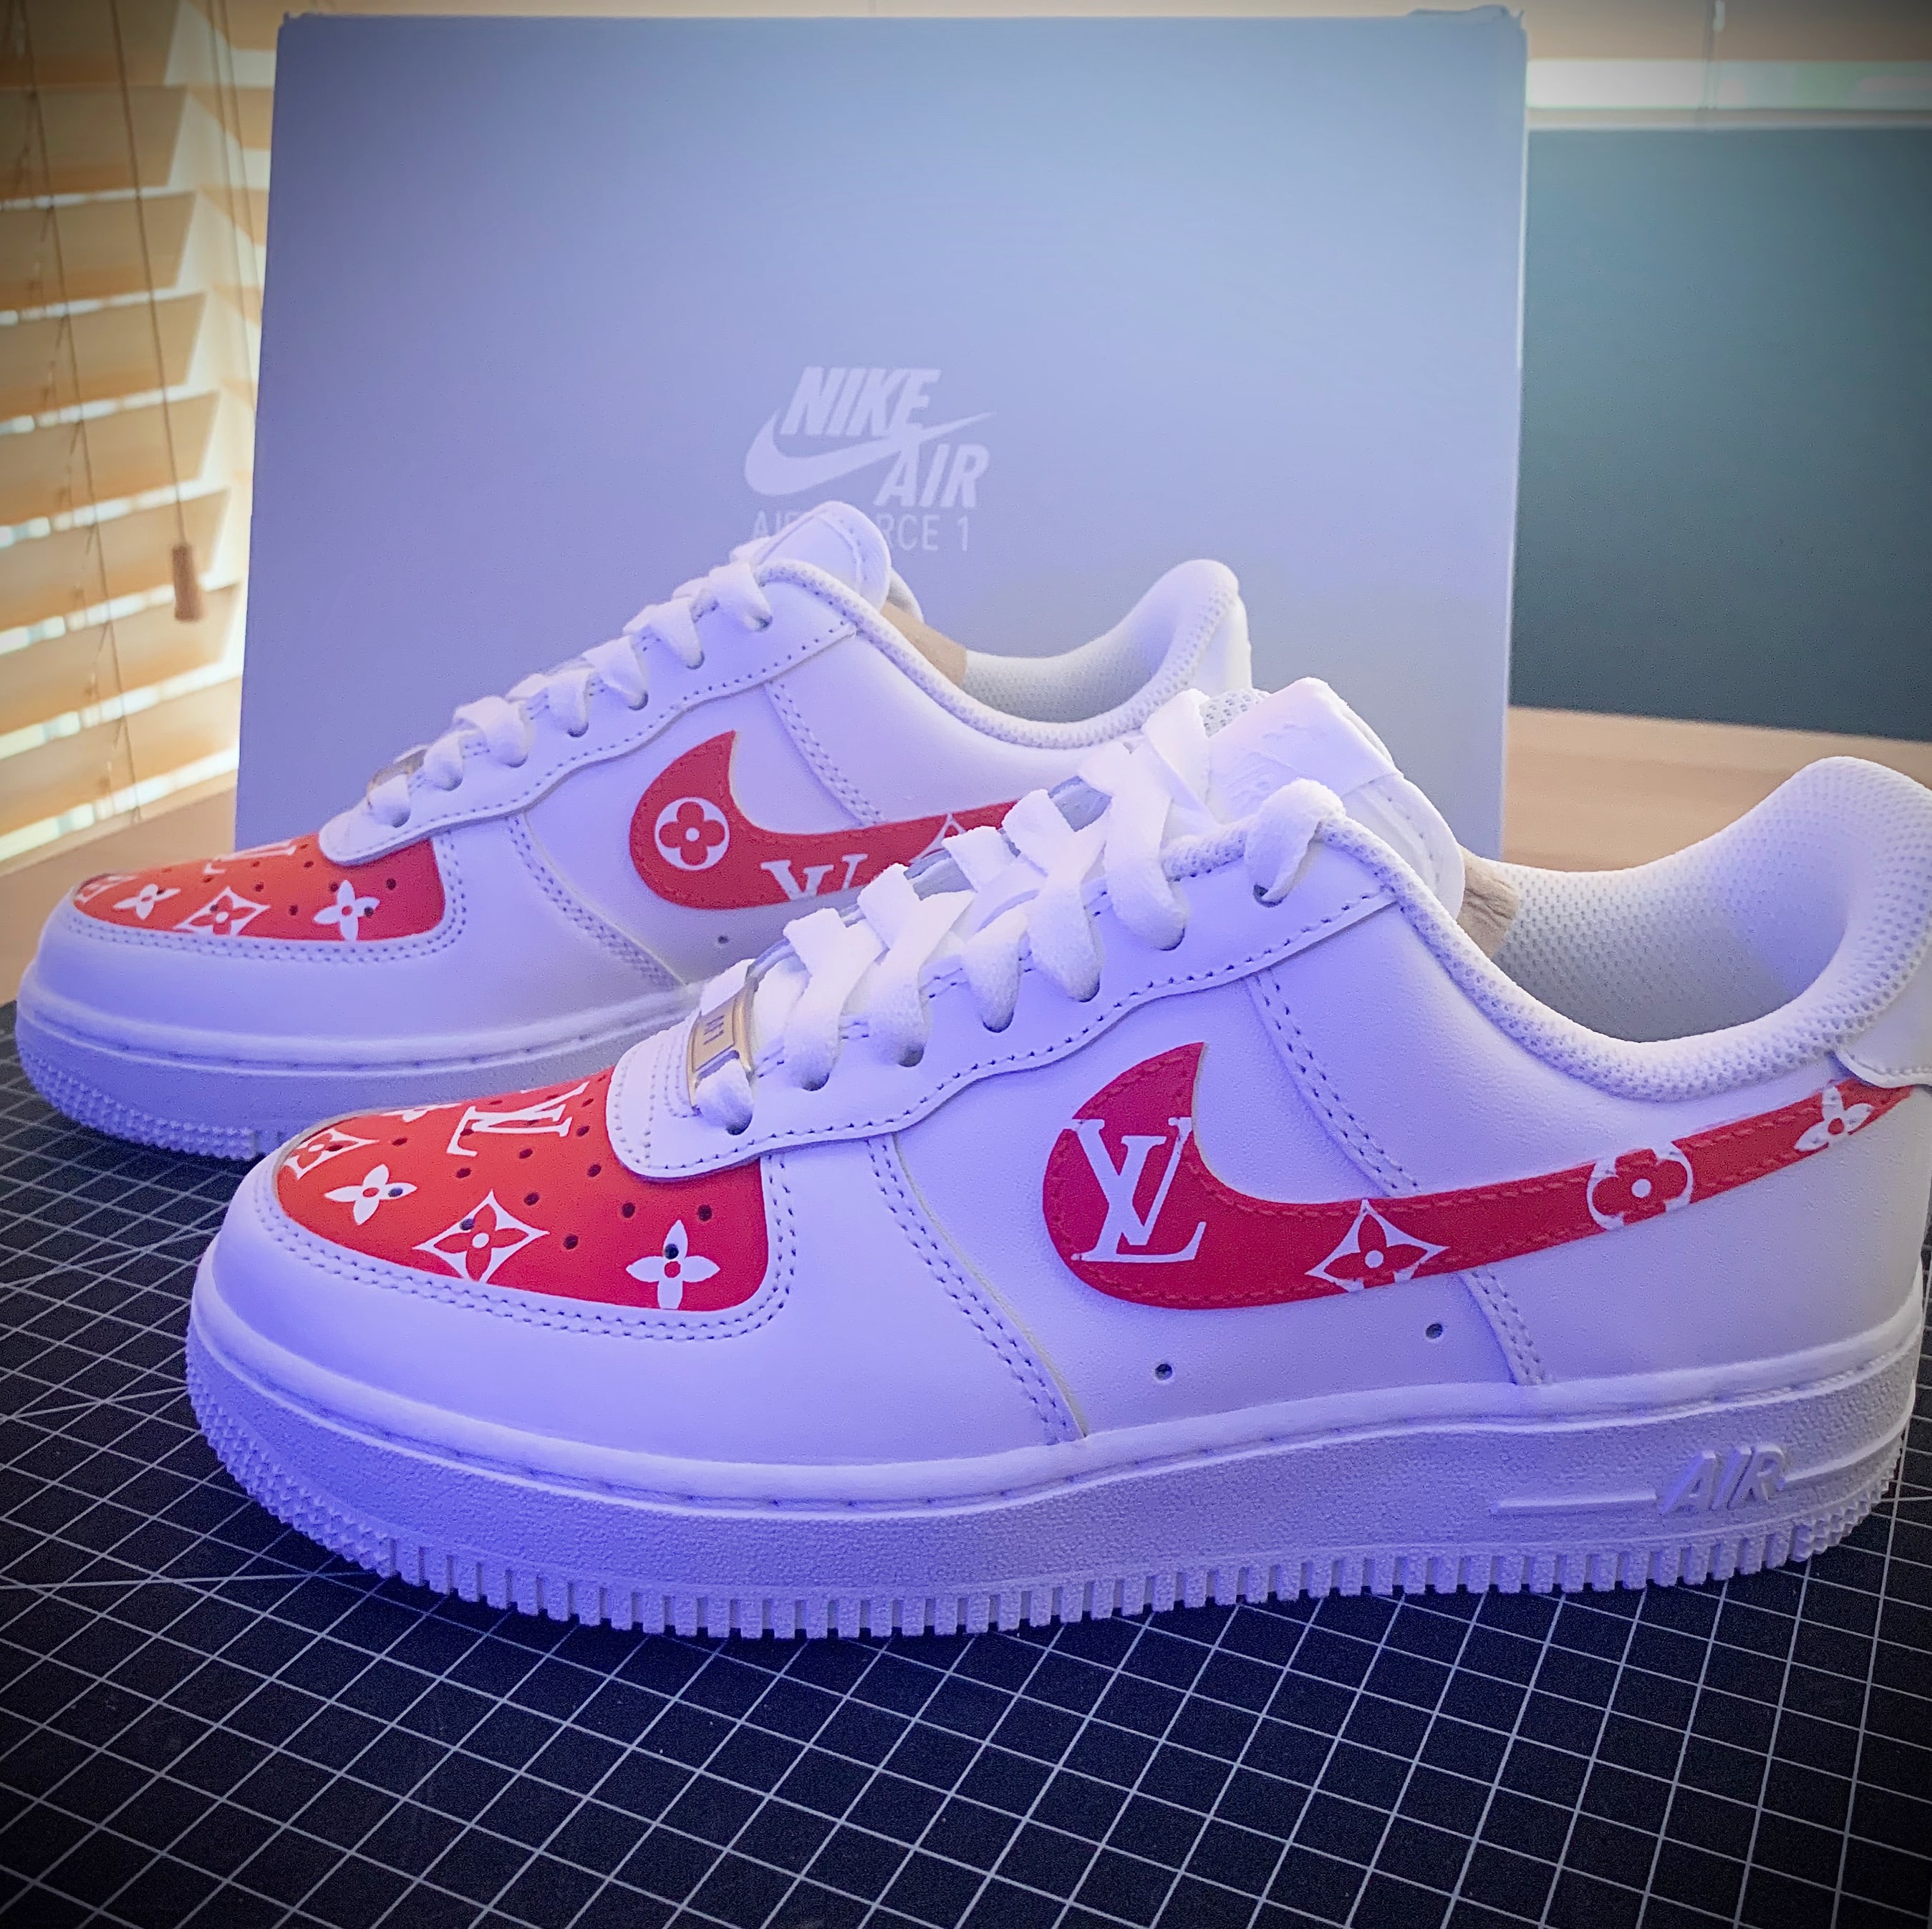 customise air force 1s